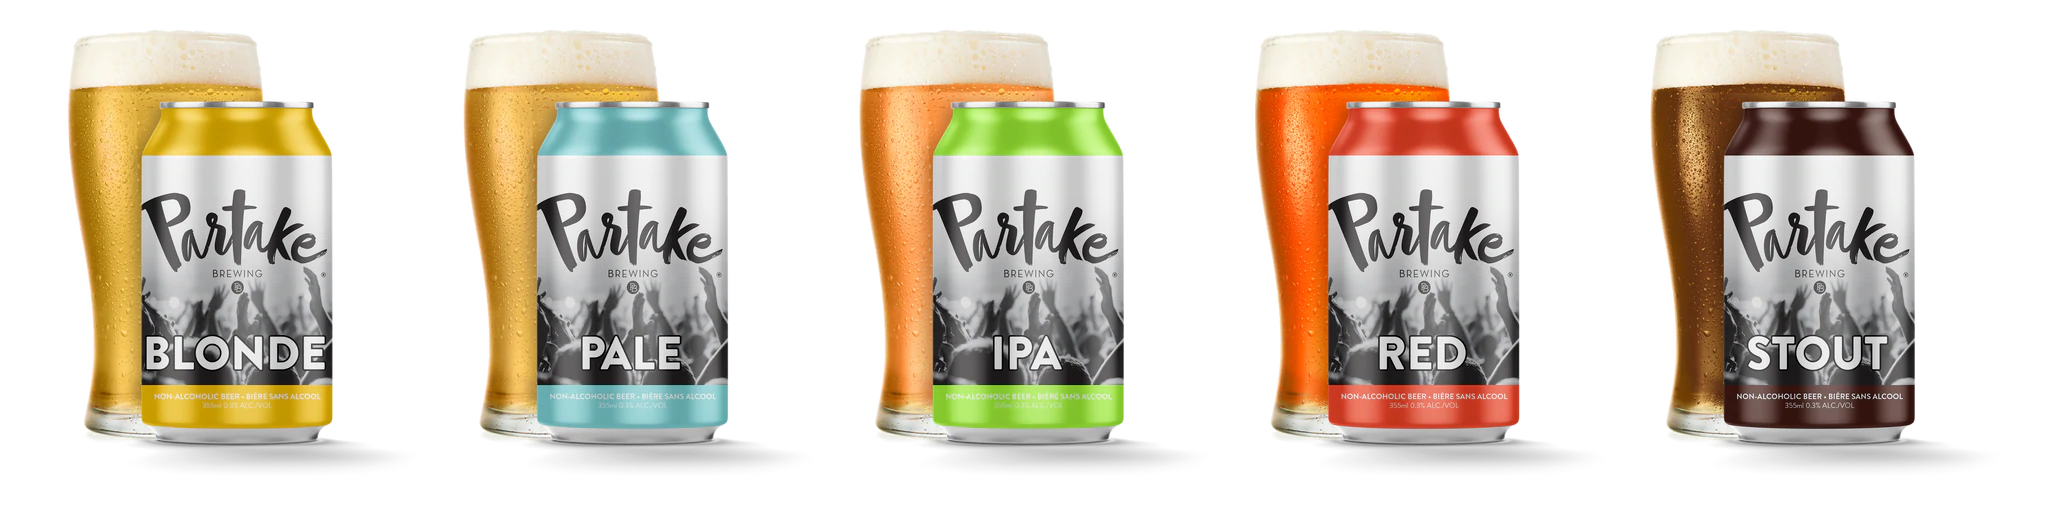 Non-Alcoholic Beer Brewer Partake Brewing Recently Raised $16.5M in Series B Funding